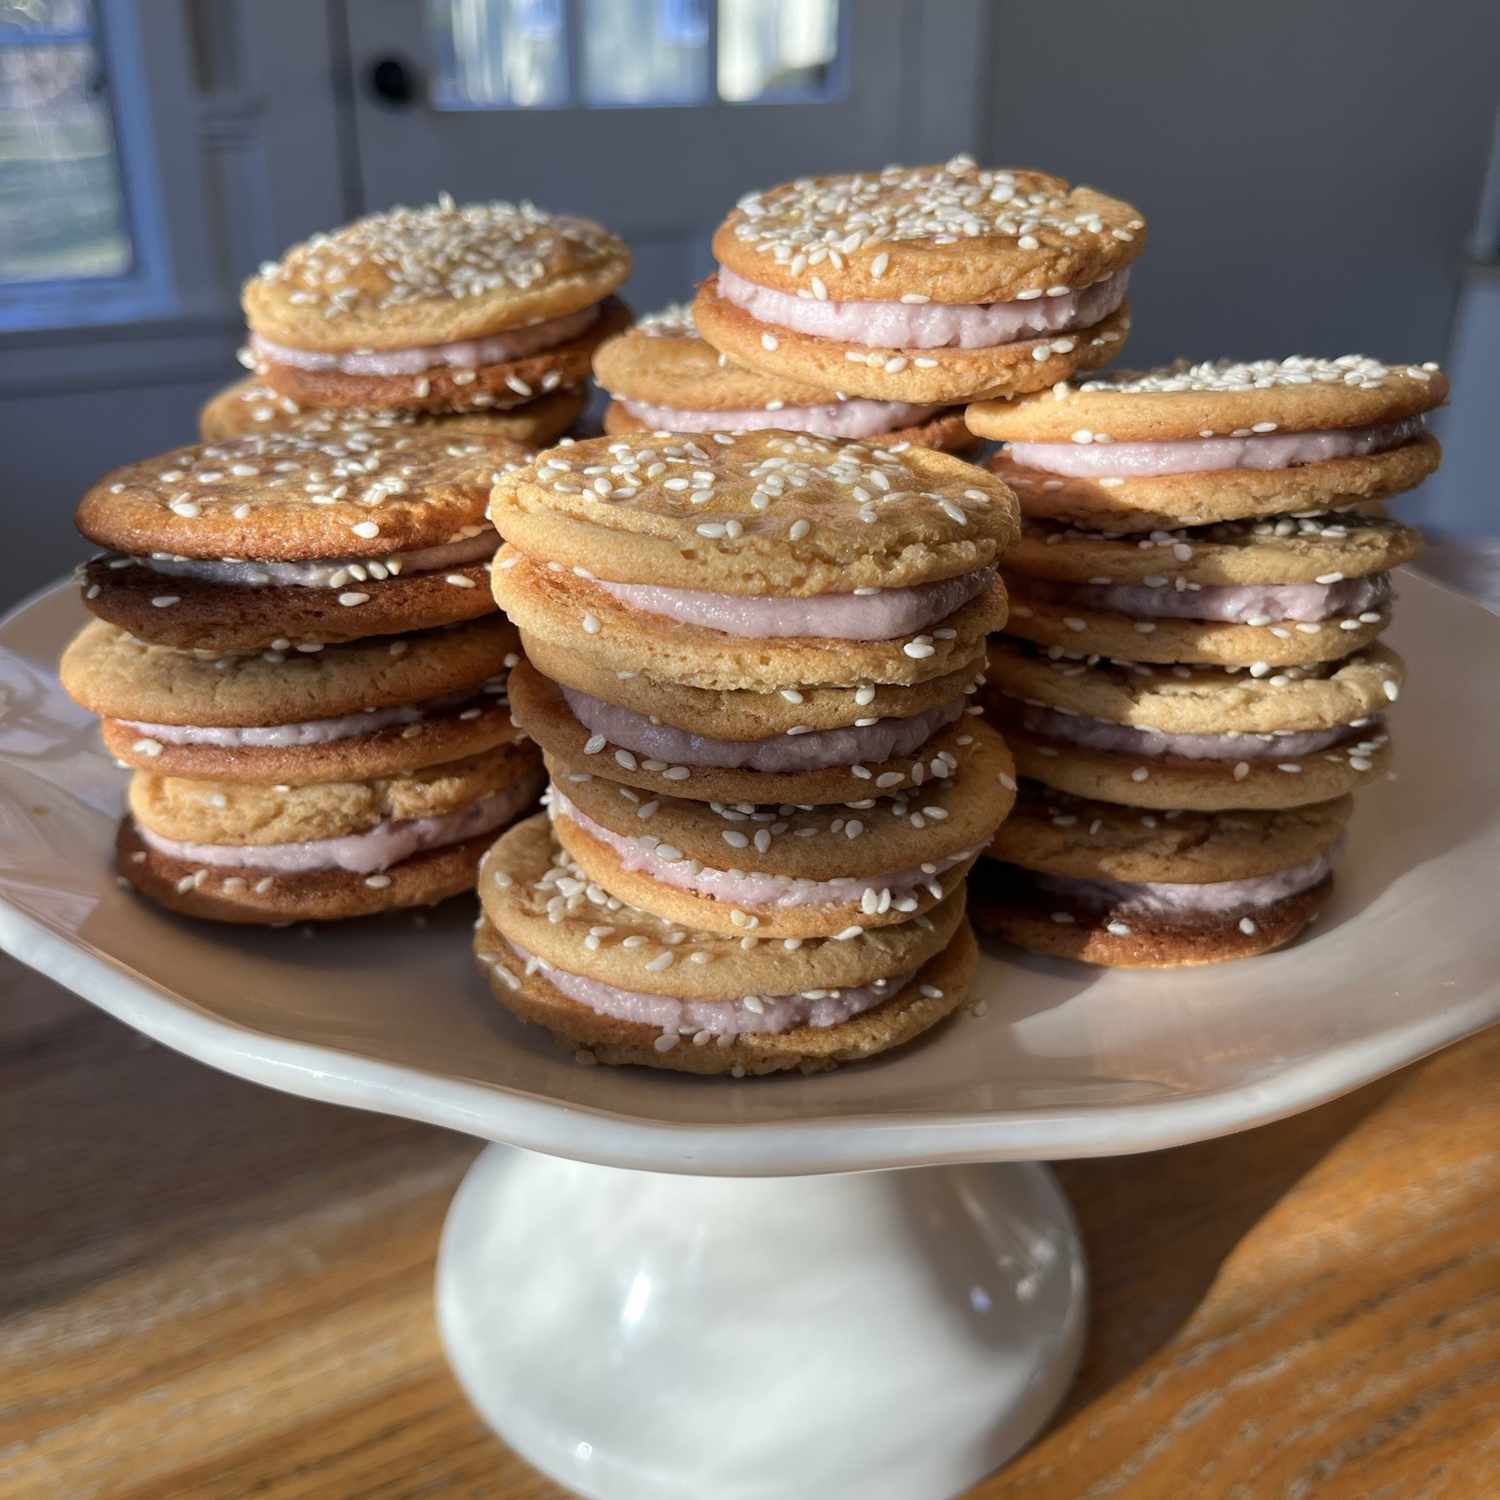 A stack of sandwich cookies garnished with sesame seeds and filled with pink filling on a white cake platter